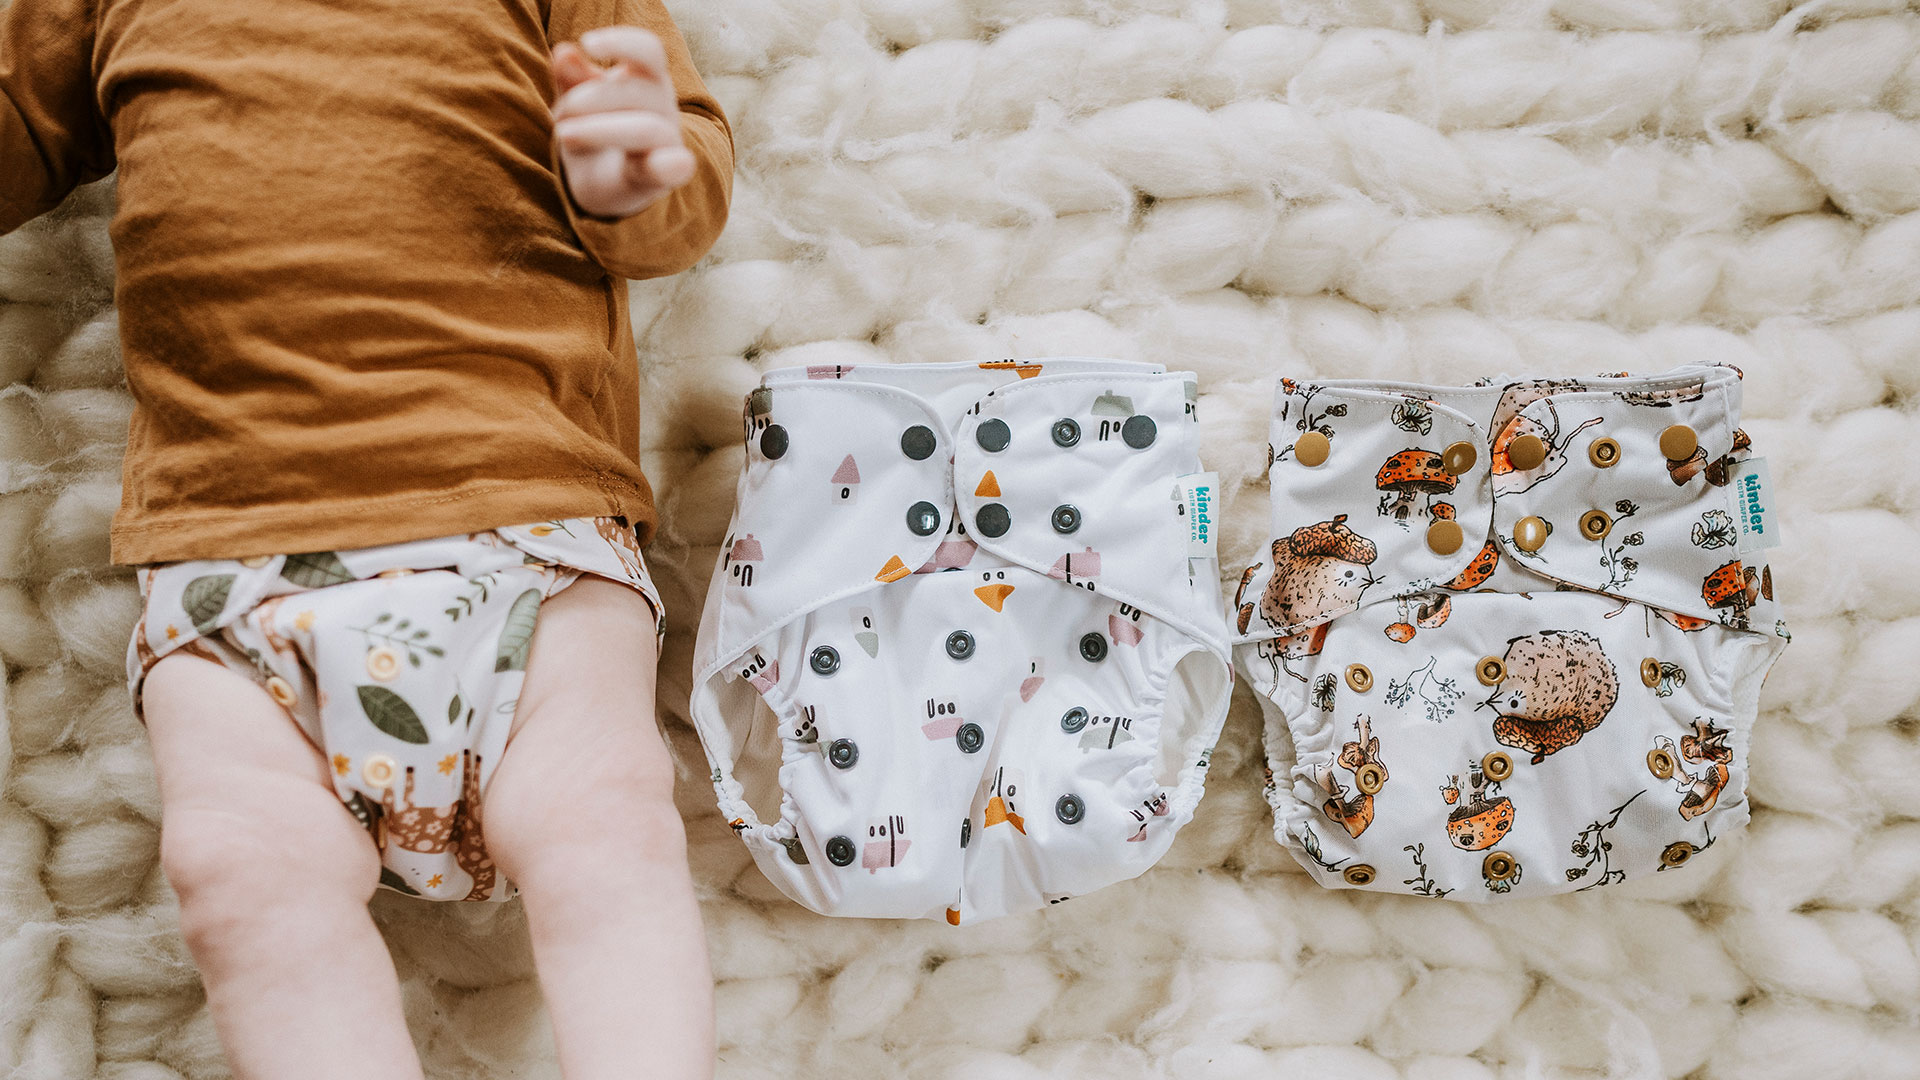 kinder cloth diaper pocket style cloth diapers with awj and tummy panels small business based in pittsburgh pa shop small reusable diapers